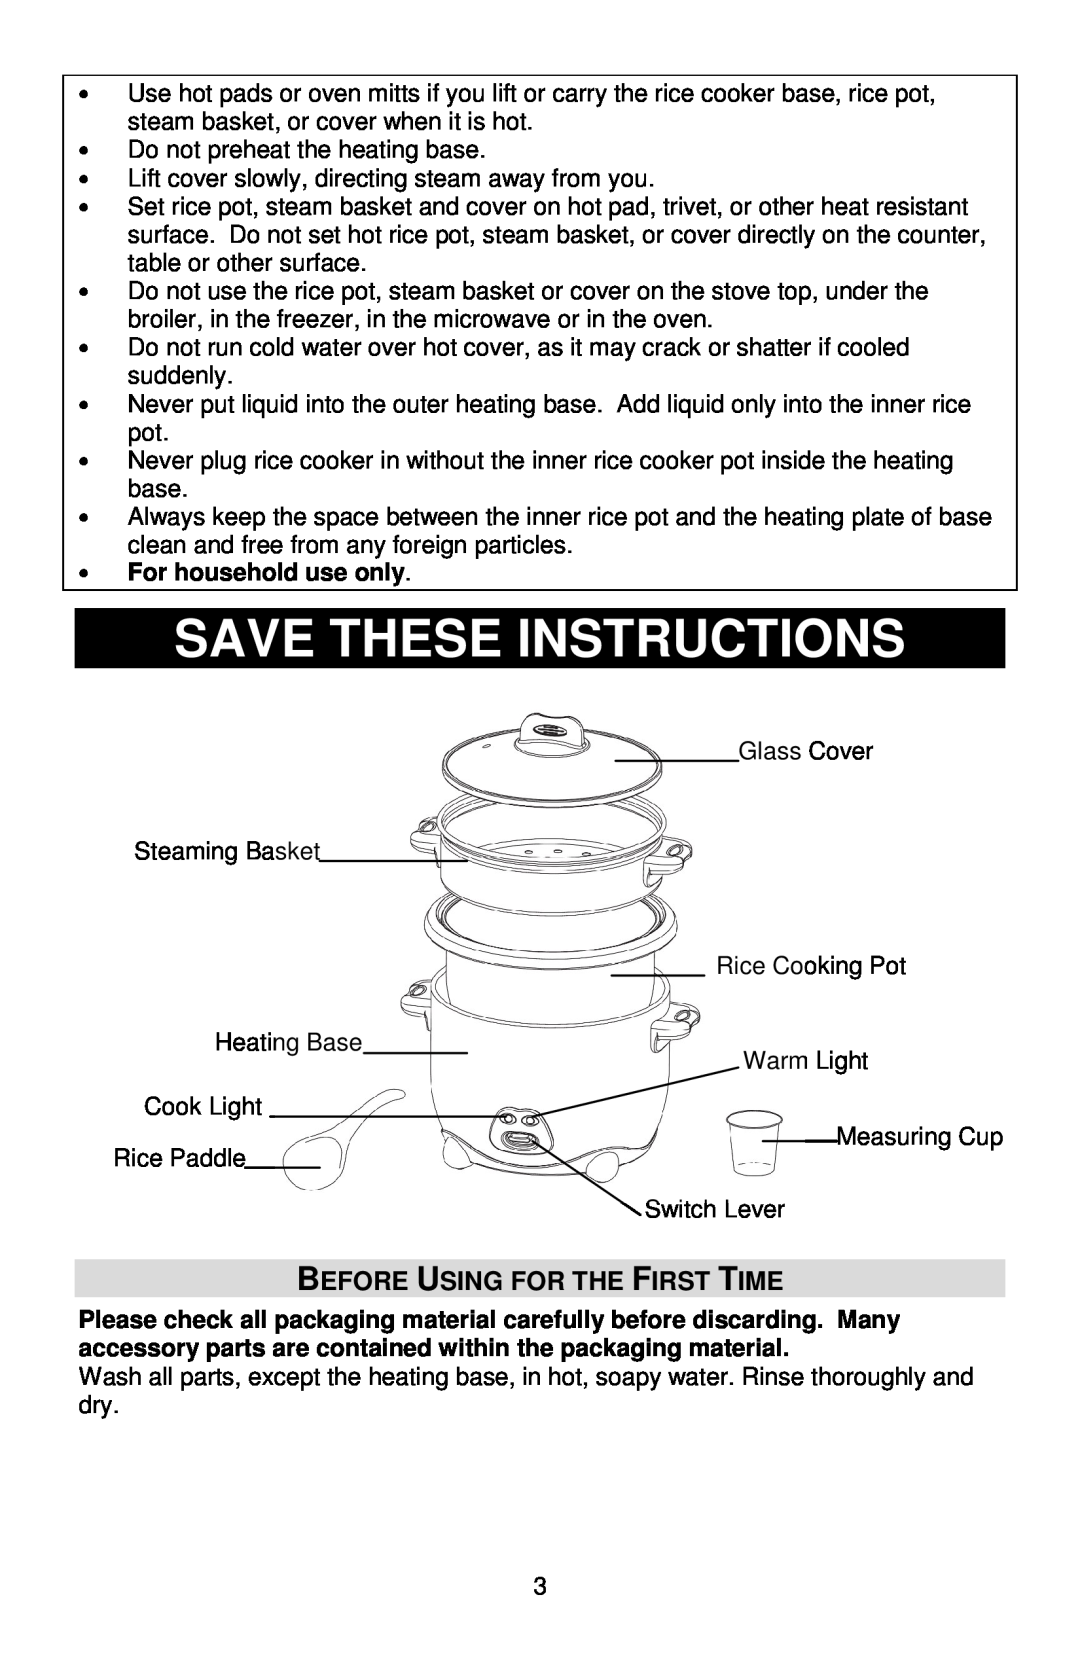 West Bend 88010, L5808 instruction manual Save These Instructions, Before Using For The First Time, For household use only 